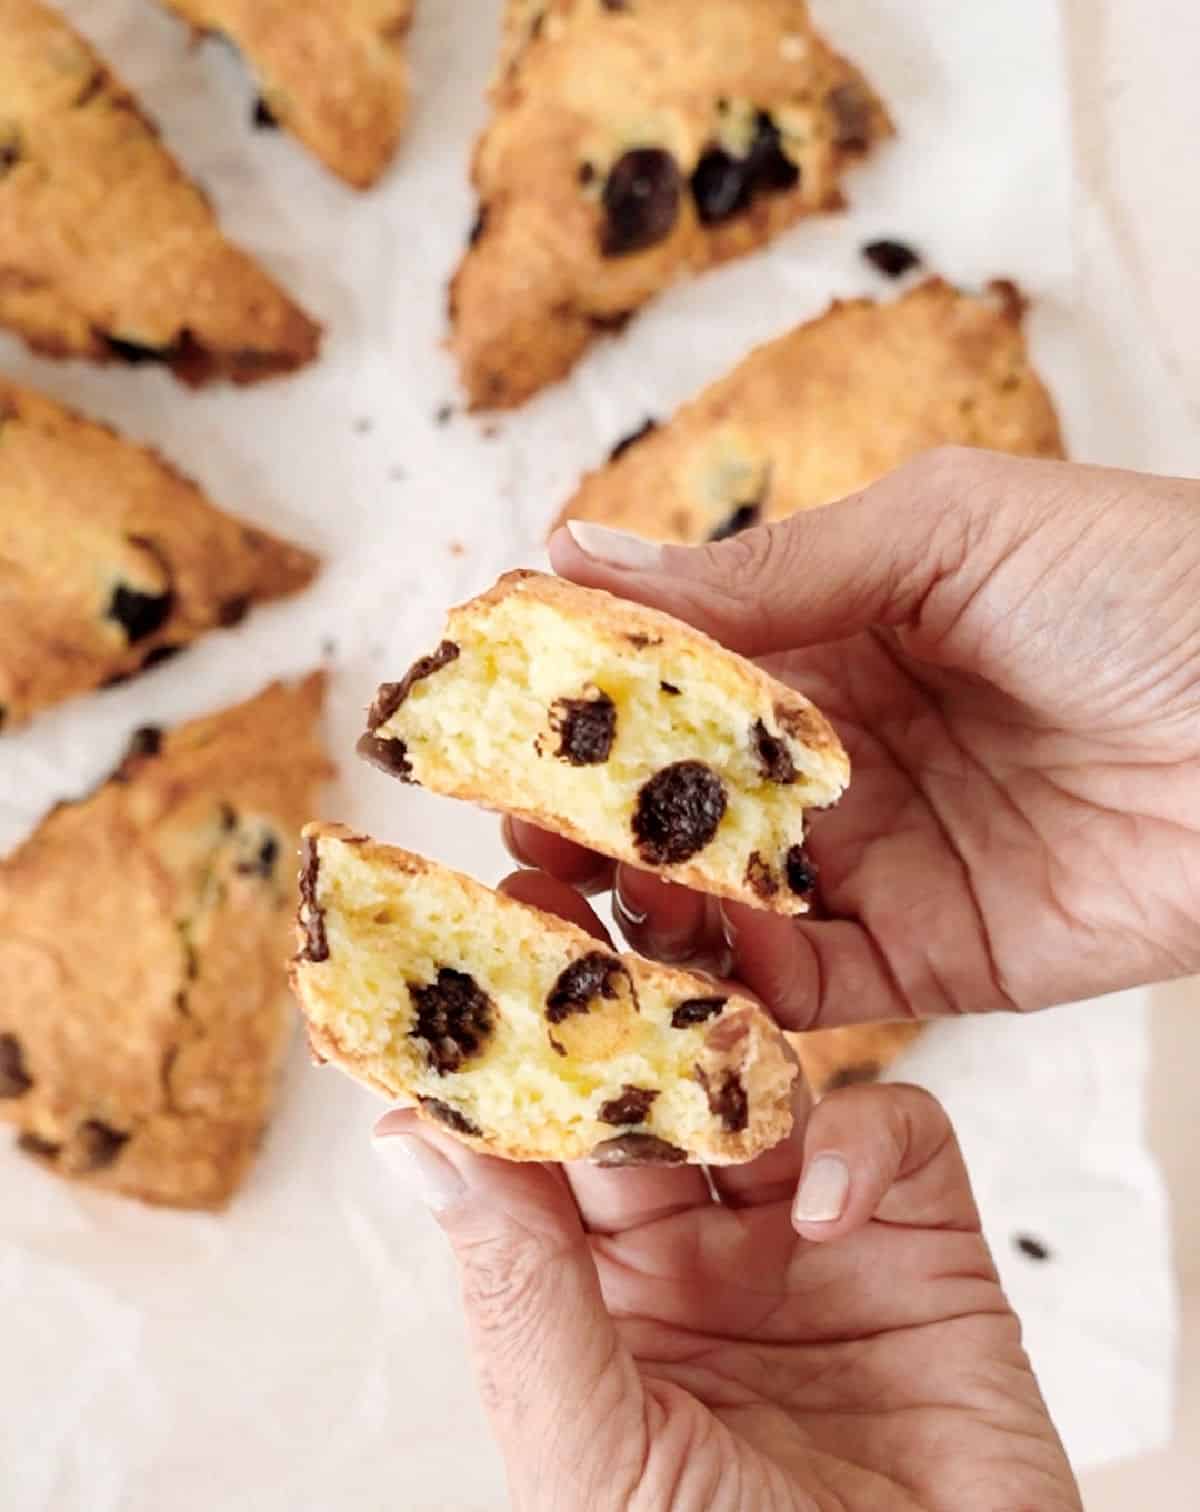 Hand opening a cherry chocolate chunk scone with more baked ones beneath.